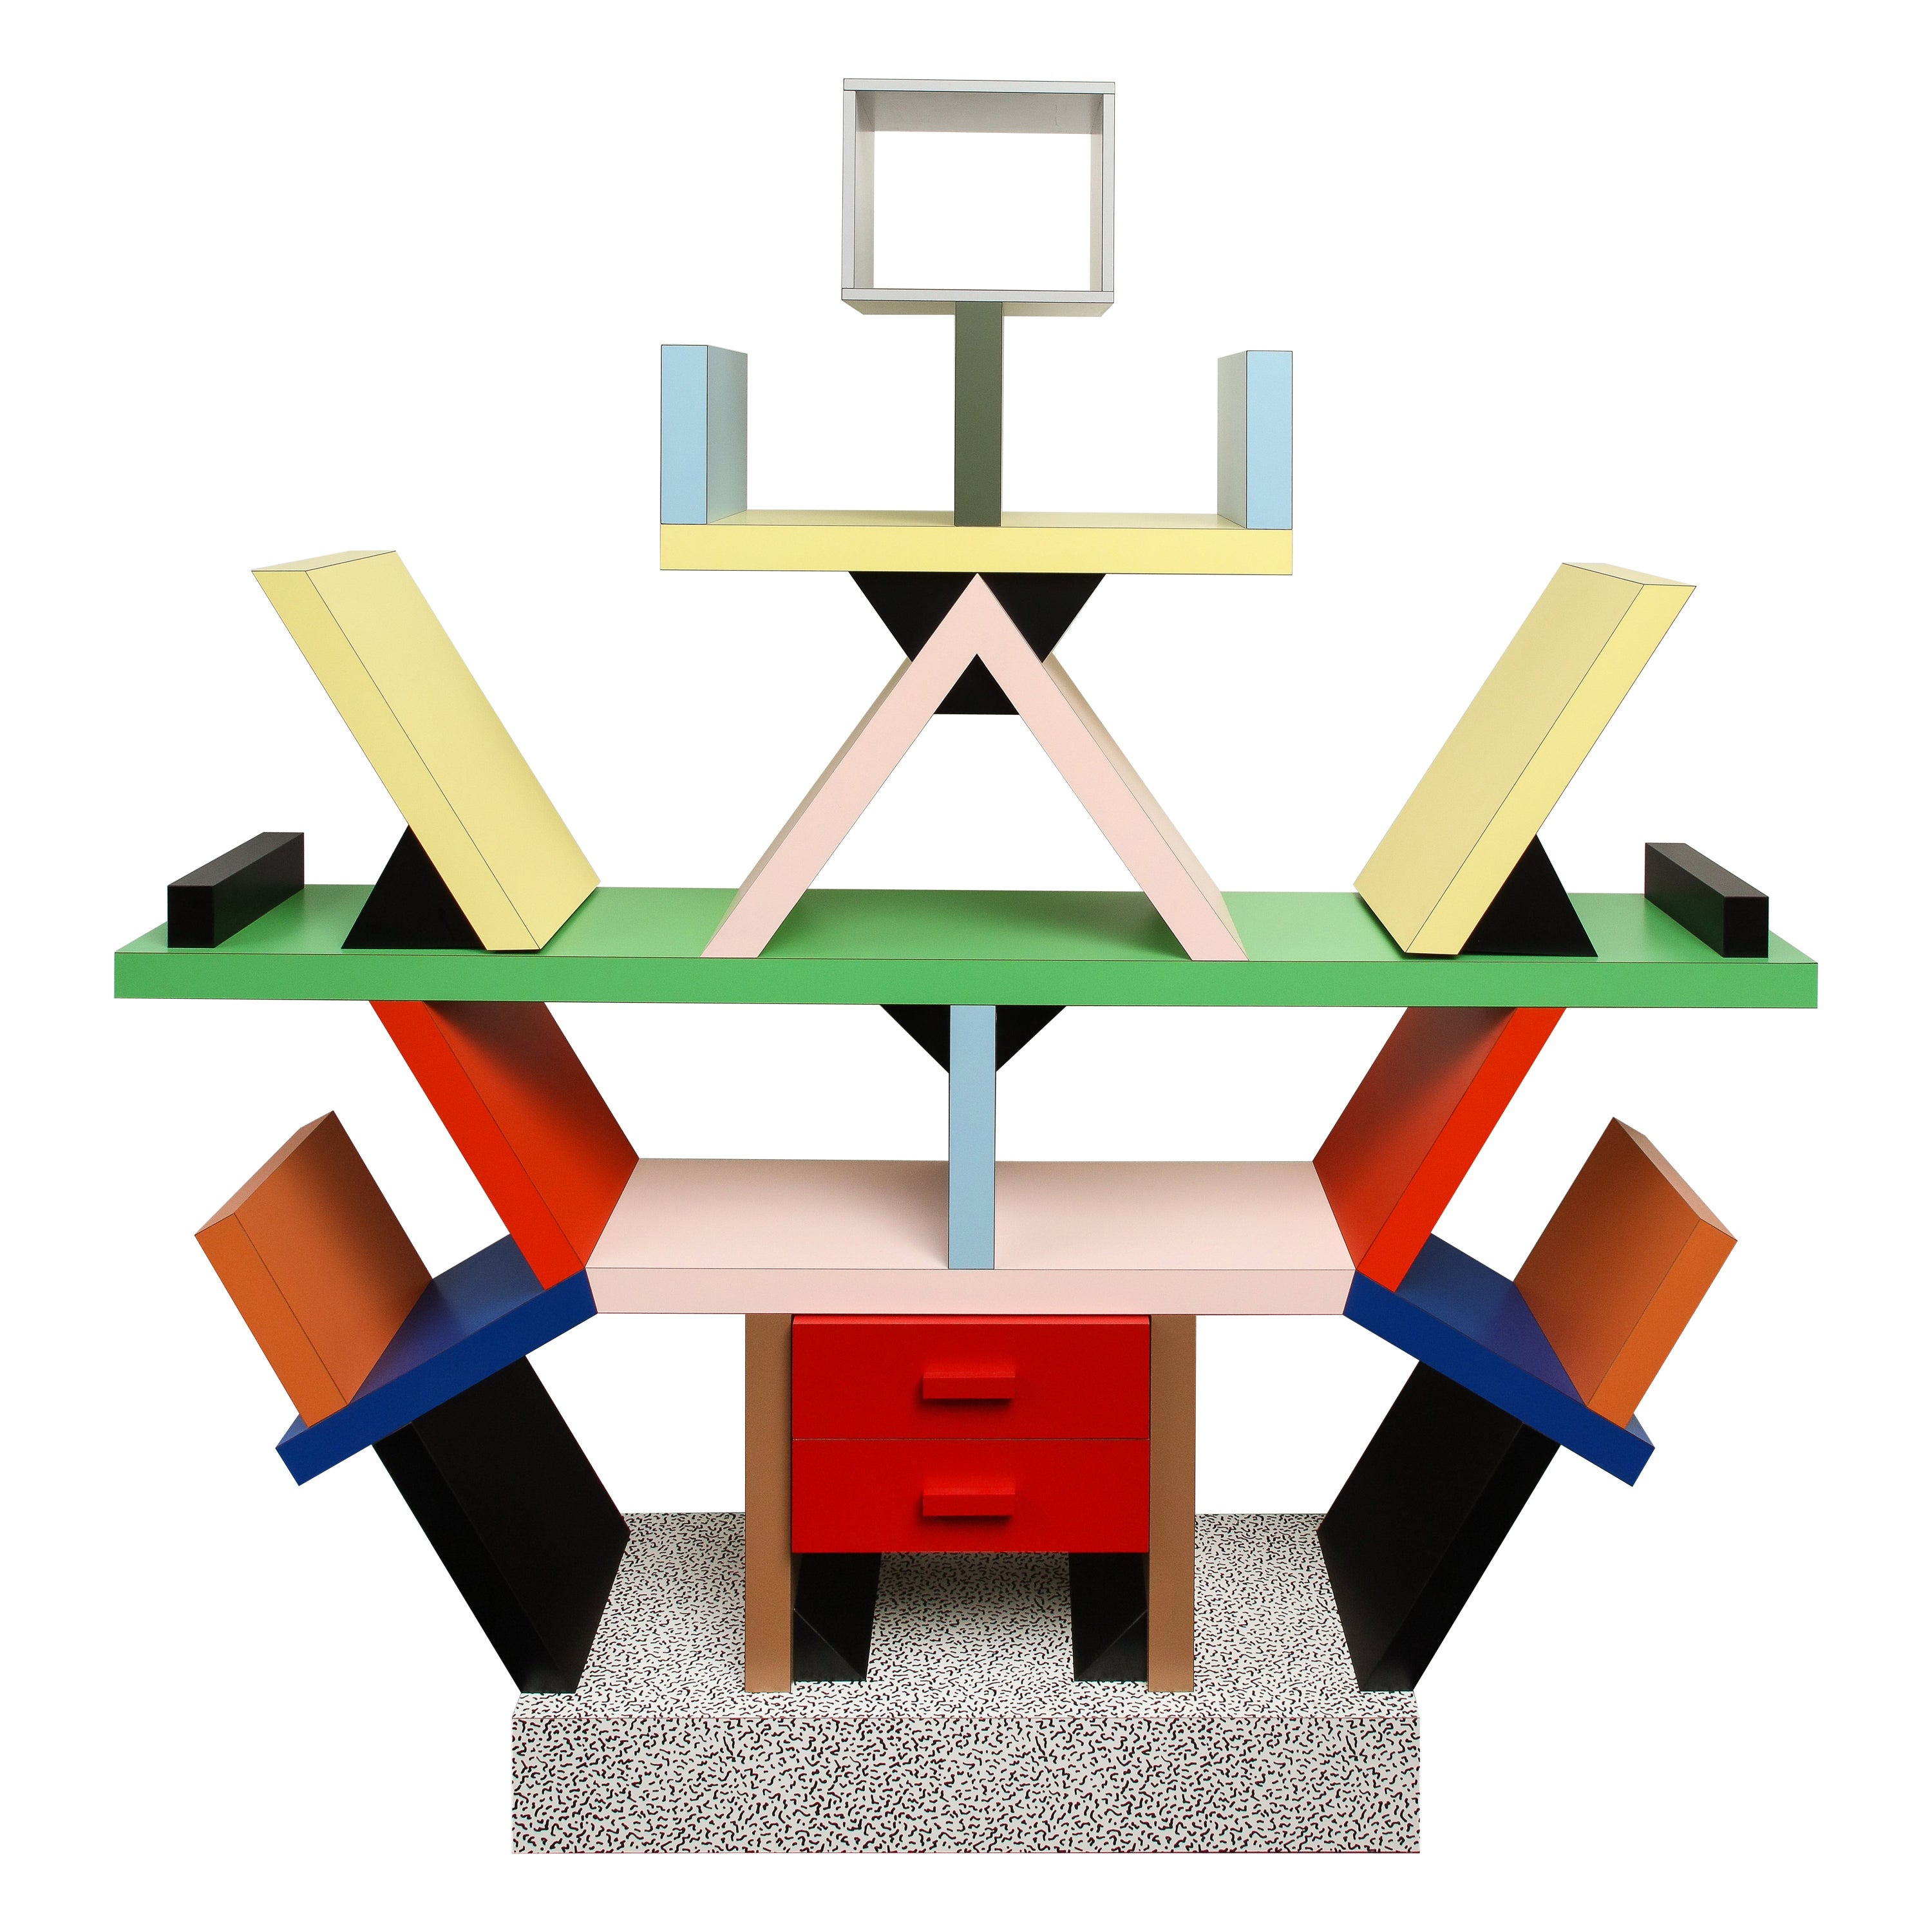 Memphis Collection "Carlton" Room Divider/Bookcase by Ettore Sottsass, 1981